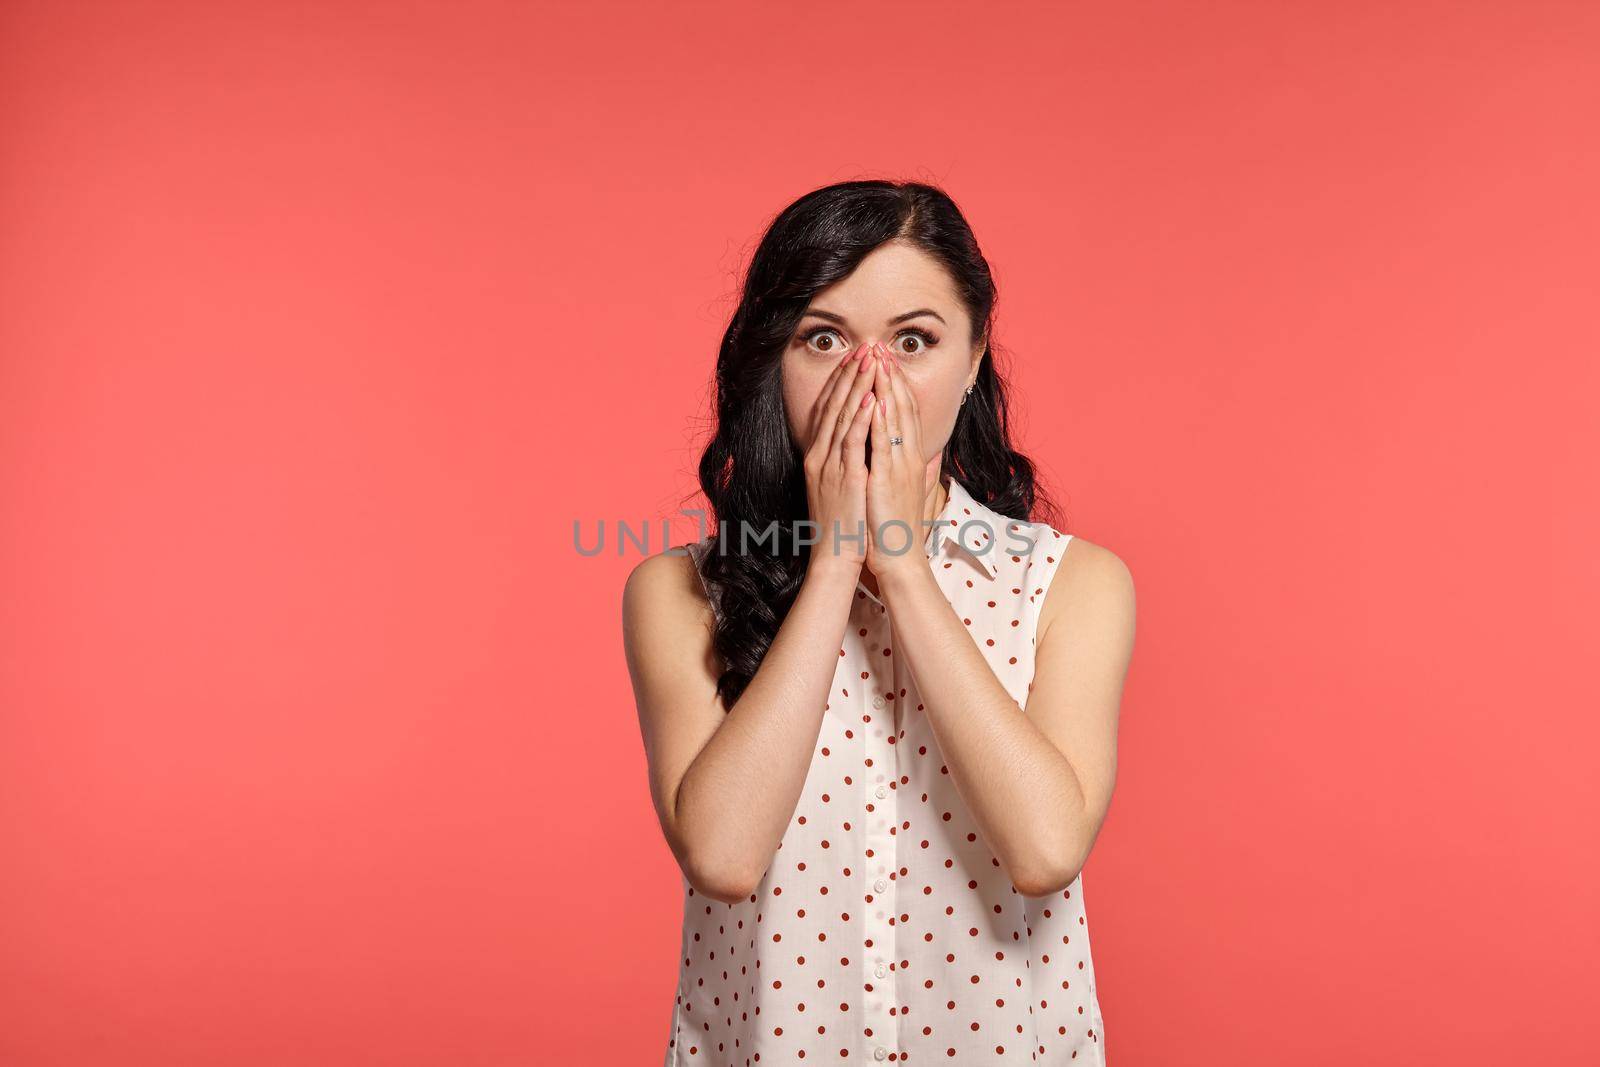 Studio shot of an elegant adolescent girl looking surprised, wearing casual white polka dot blouse. Little brunette female has closed her mouth with hands and looking at the camera, posing over a pink background. People and sincere emotions.